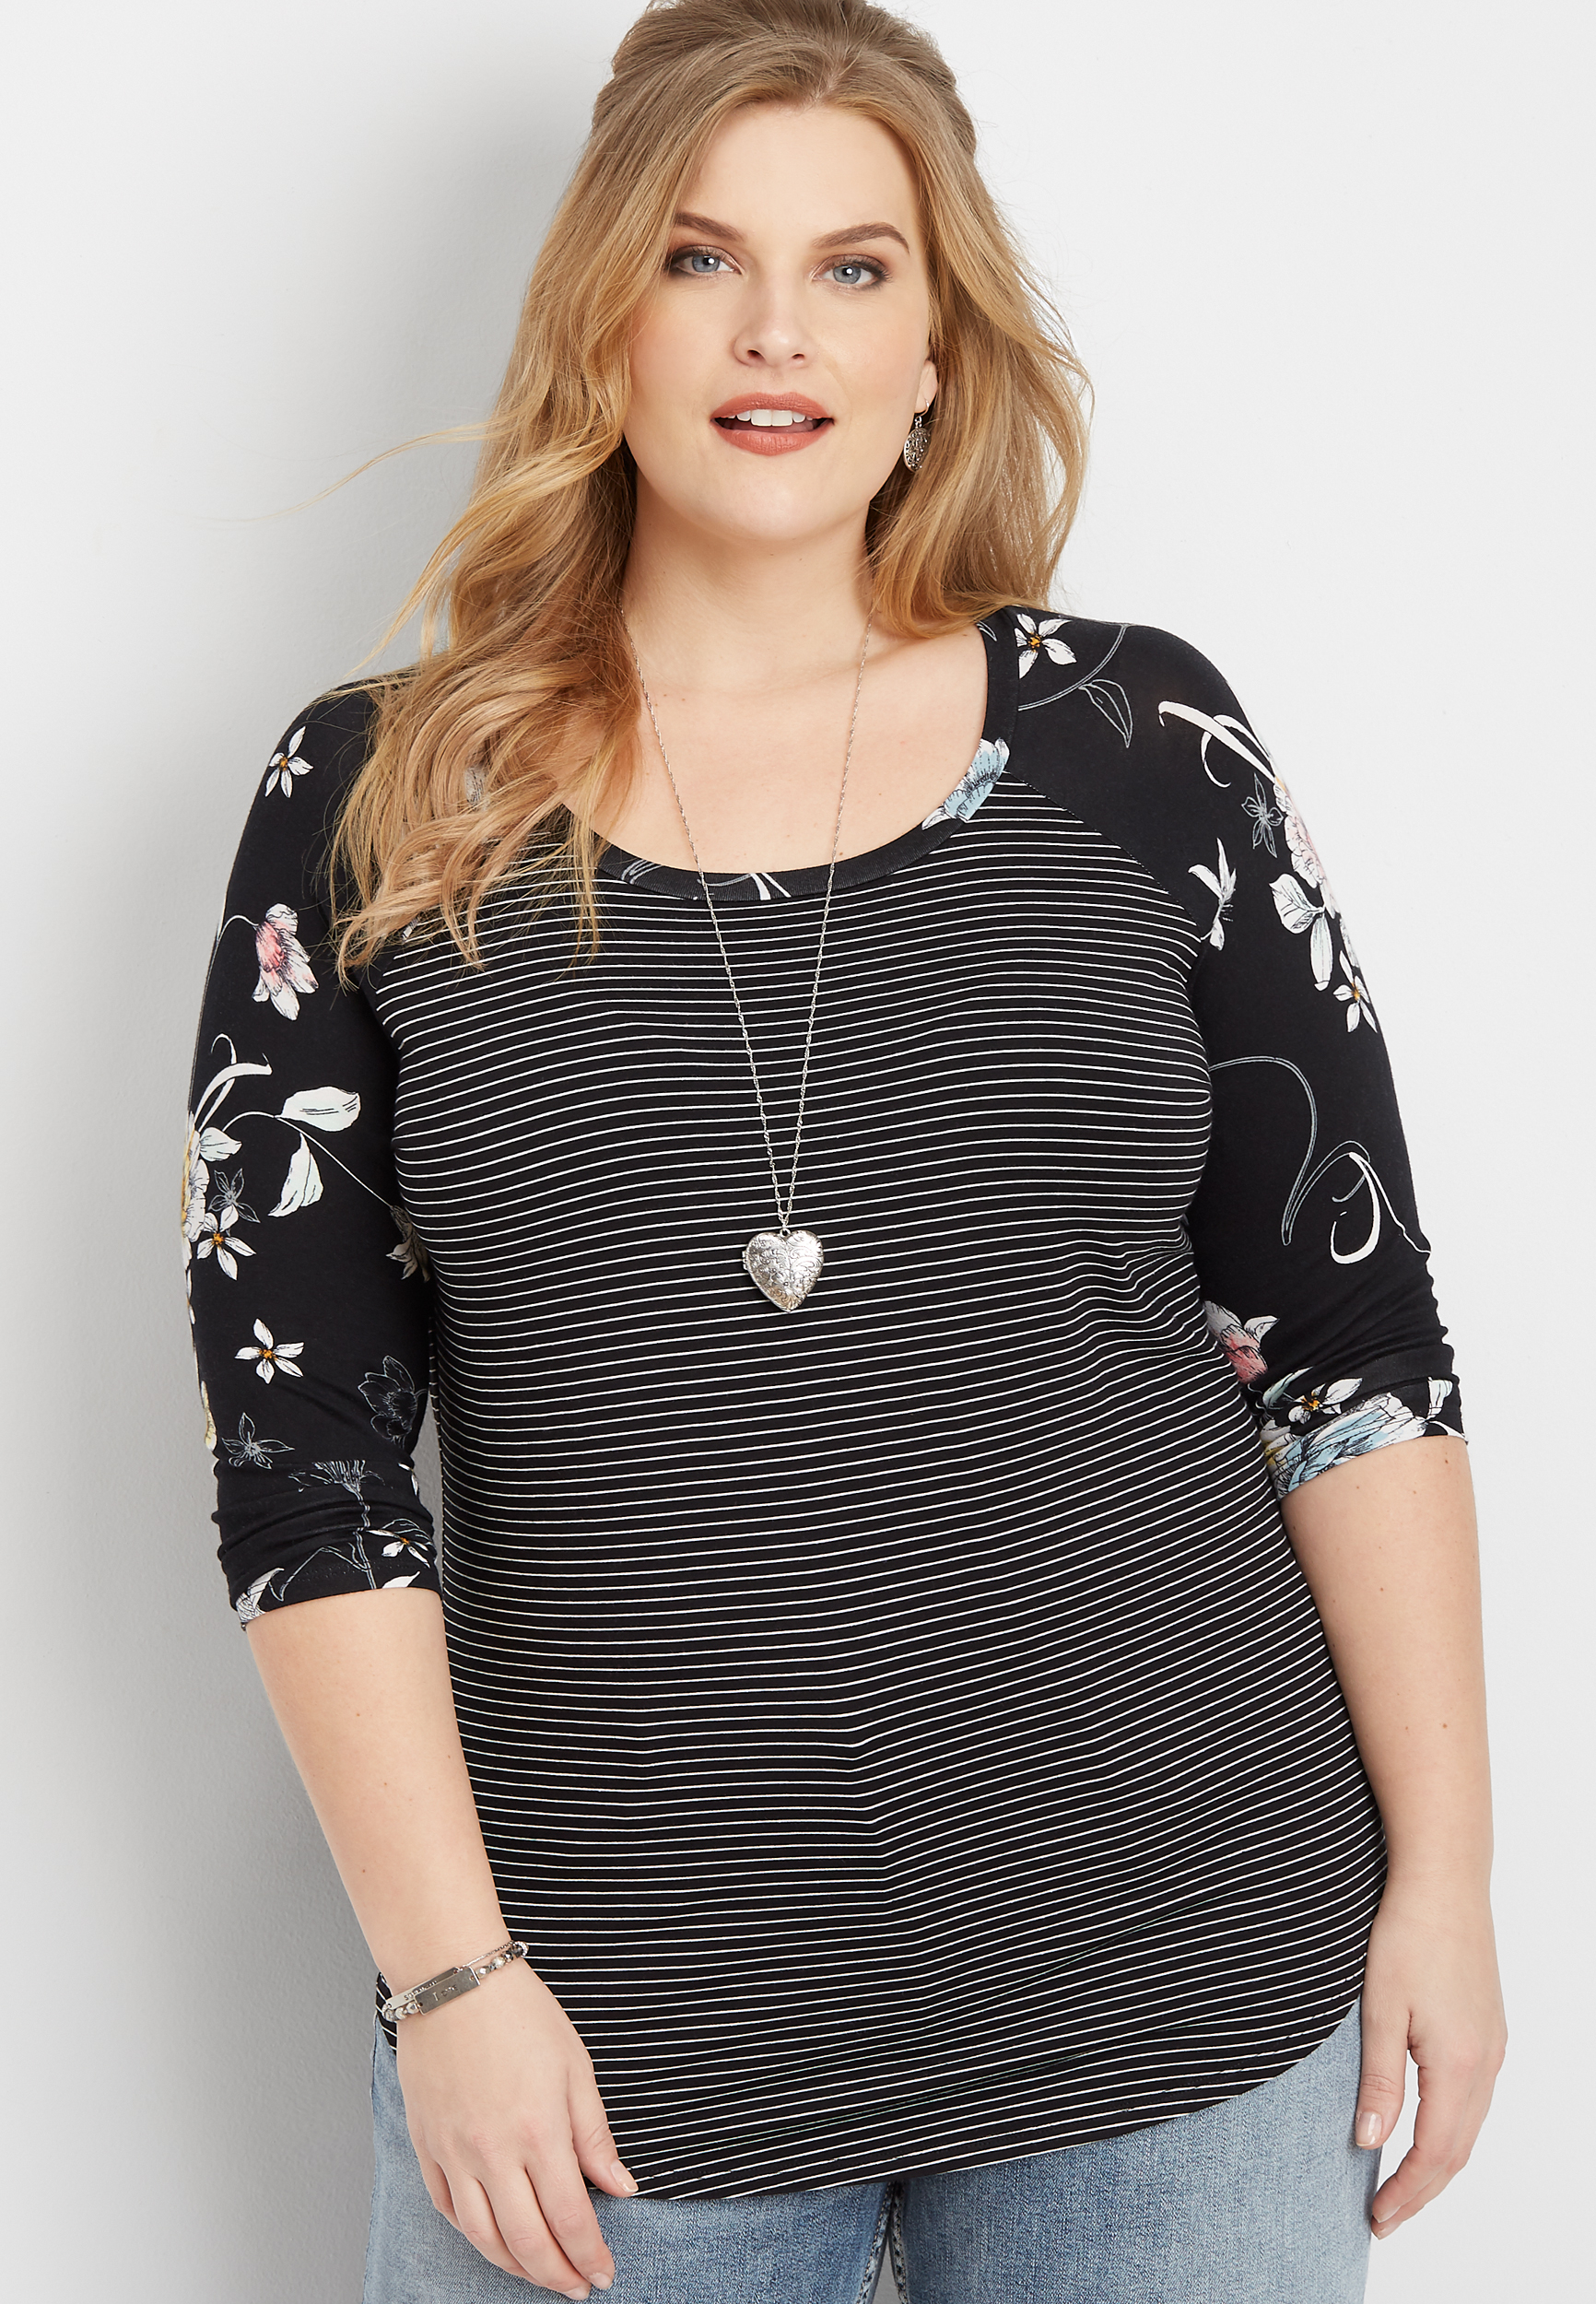 plus size 24/7 printed mix baseball tee | maurices